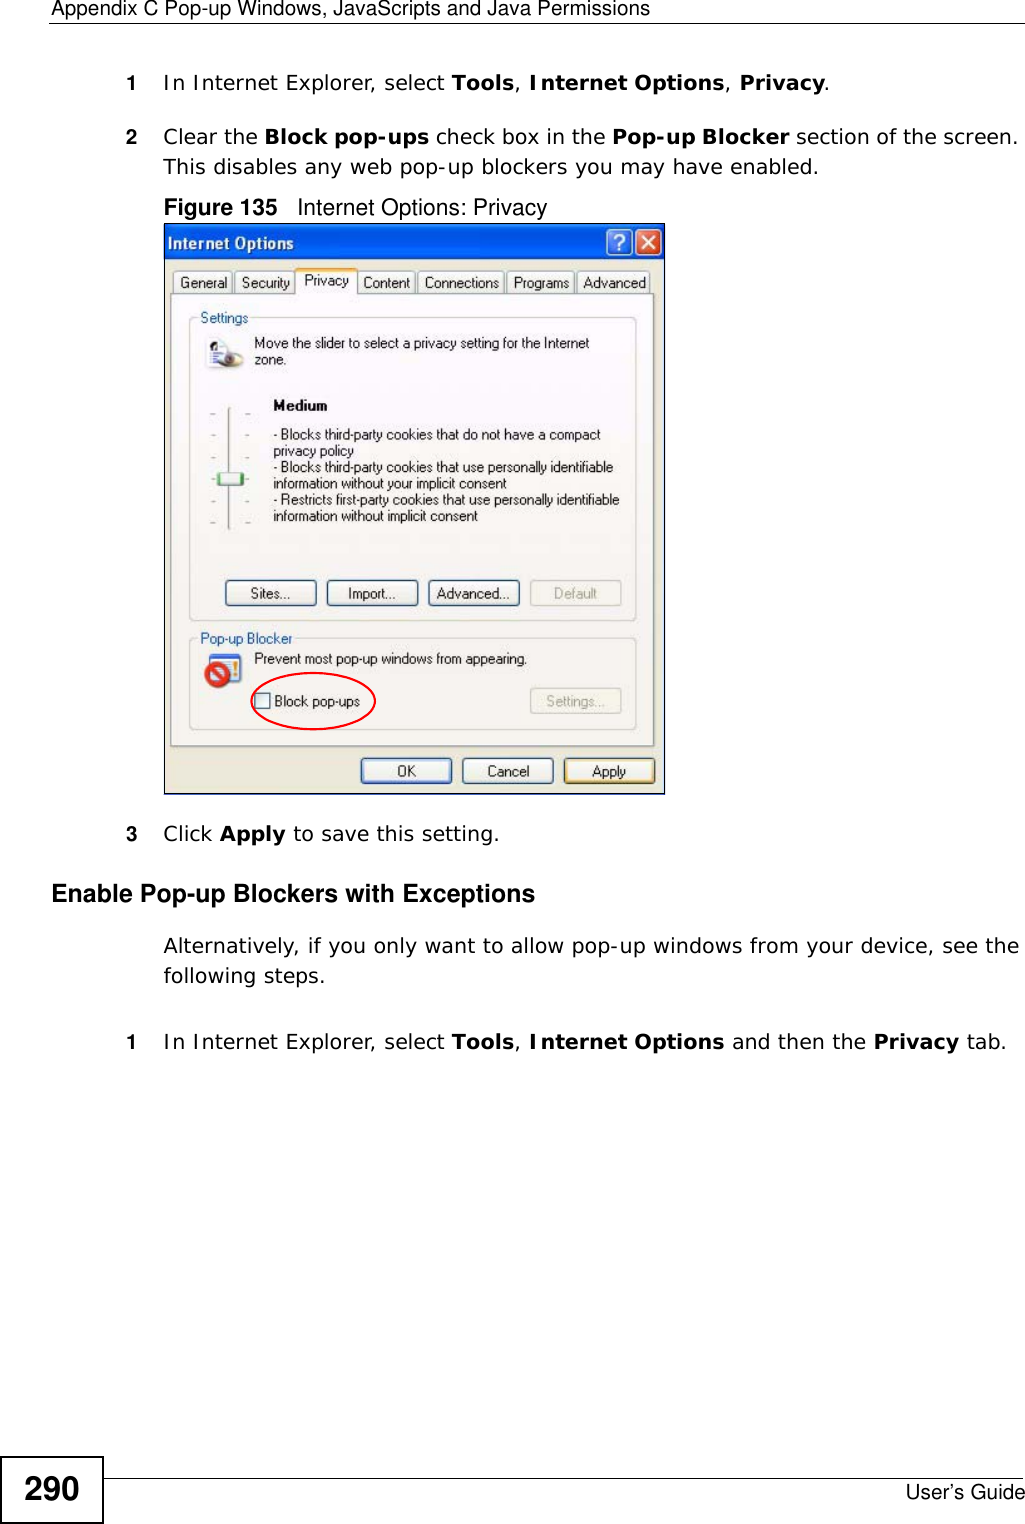 Appendix C Pop-up Windows, JavaScripts and Java PermissionsUser’s Guide2901In Internet Explorer, select Tools, Internet Options, Privacy.2Clear the Block pop-ups check box in the Pop-up Blocker section of the screen. This disables any web pop-up blockers you may have enabled. Figure 135   Internet Options: Privacy3Click Apply to save this setting.Enable Pop-up Blockers with ExceptionsAlternatively, if you only want to allow pop-up windows from your device, see the following steps.1In Internet Explorer, select Tools, Internet Options and then the Privacy tab. 